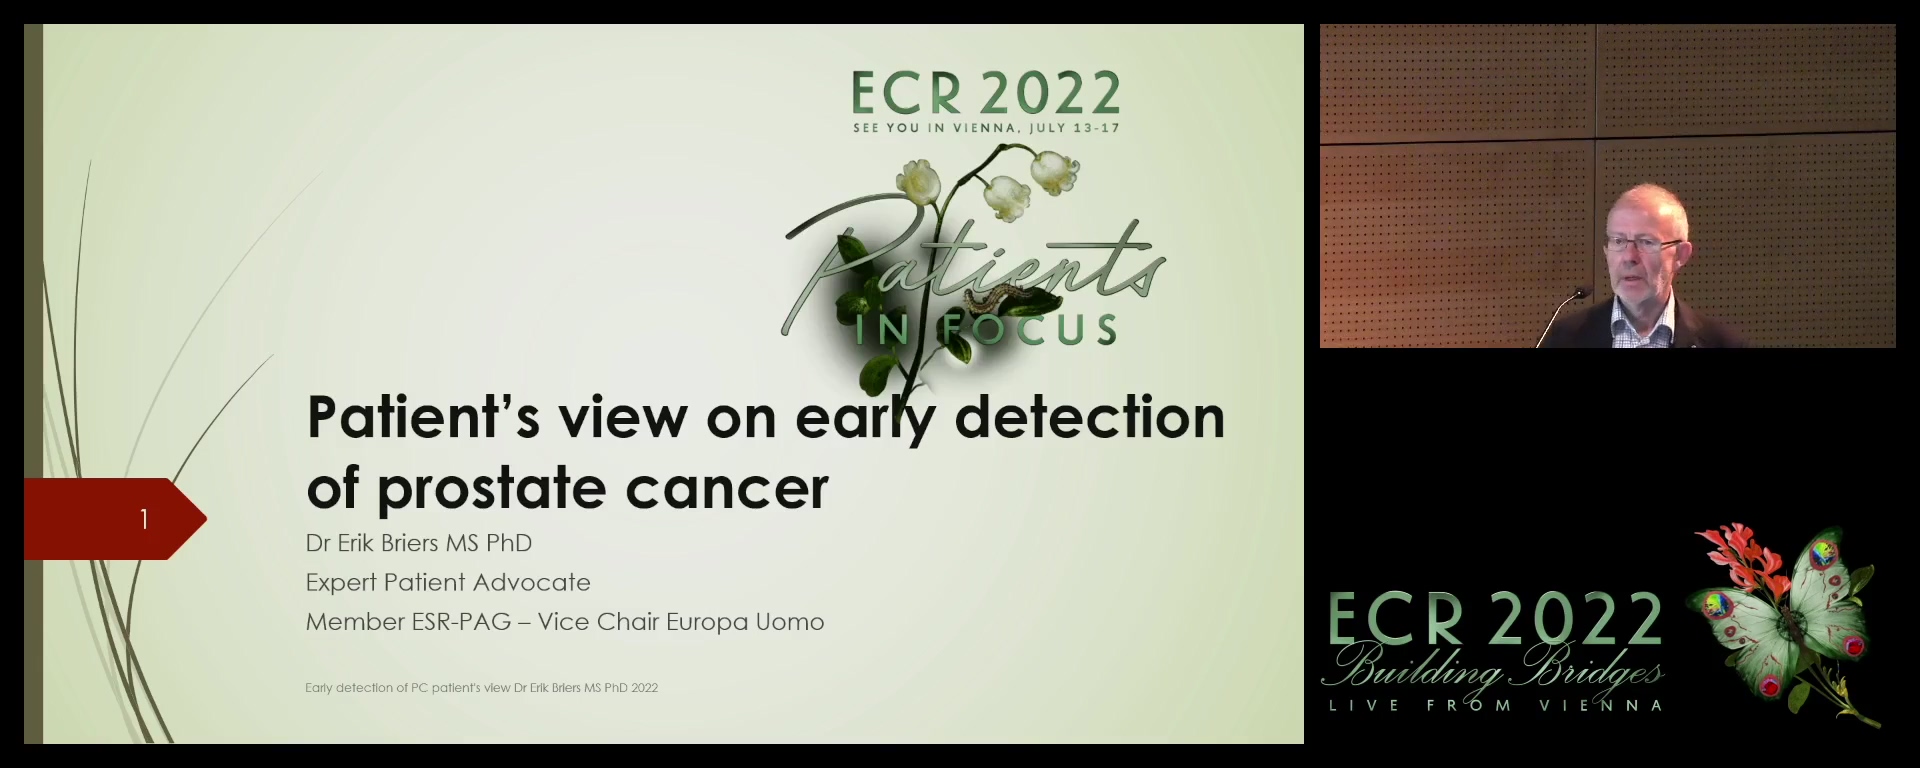 The patient's view on early detection and diagnosis of prostate cancer - Erik Briers, Hasselt / BE